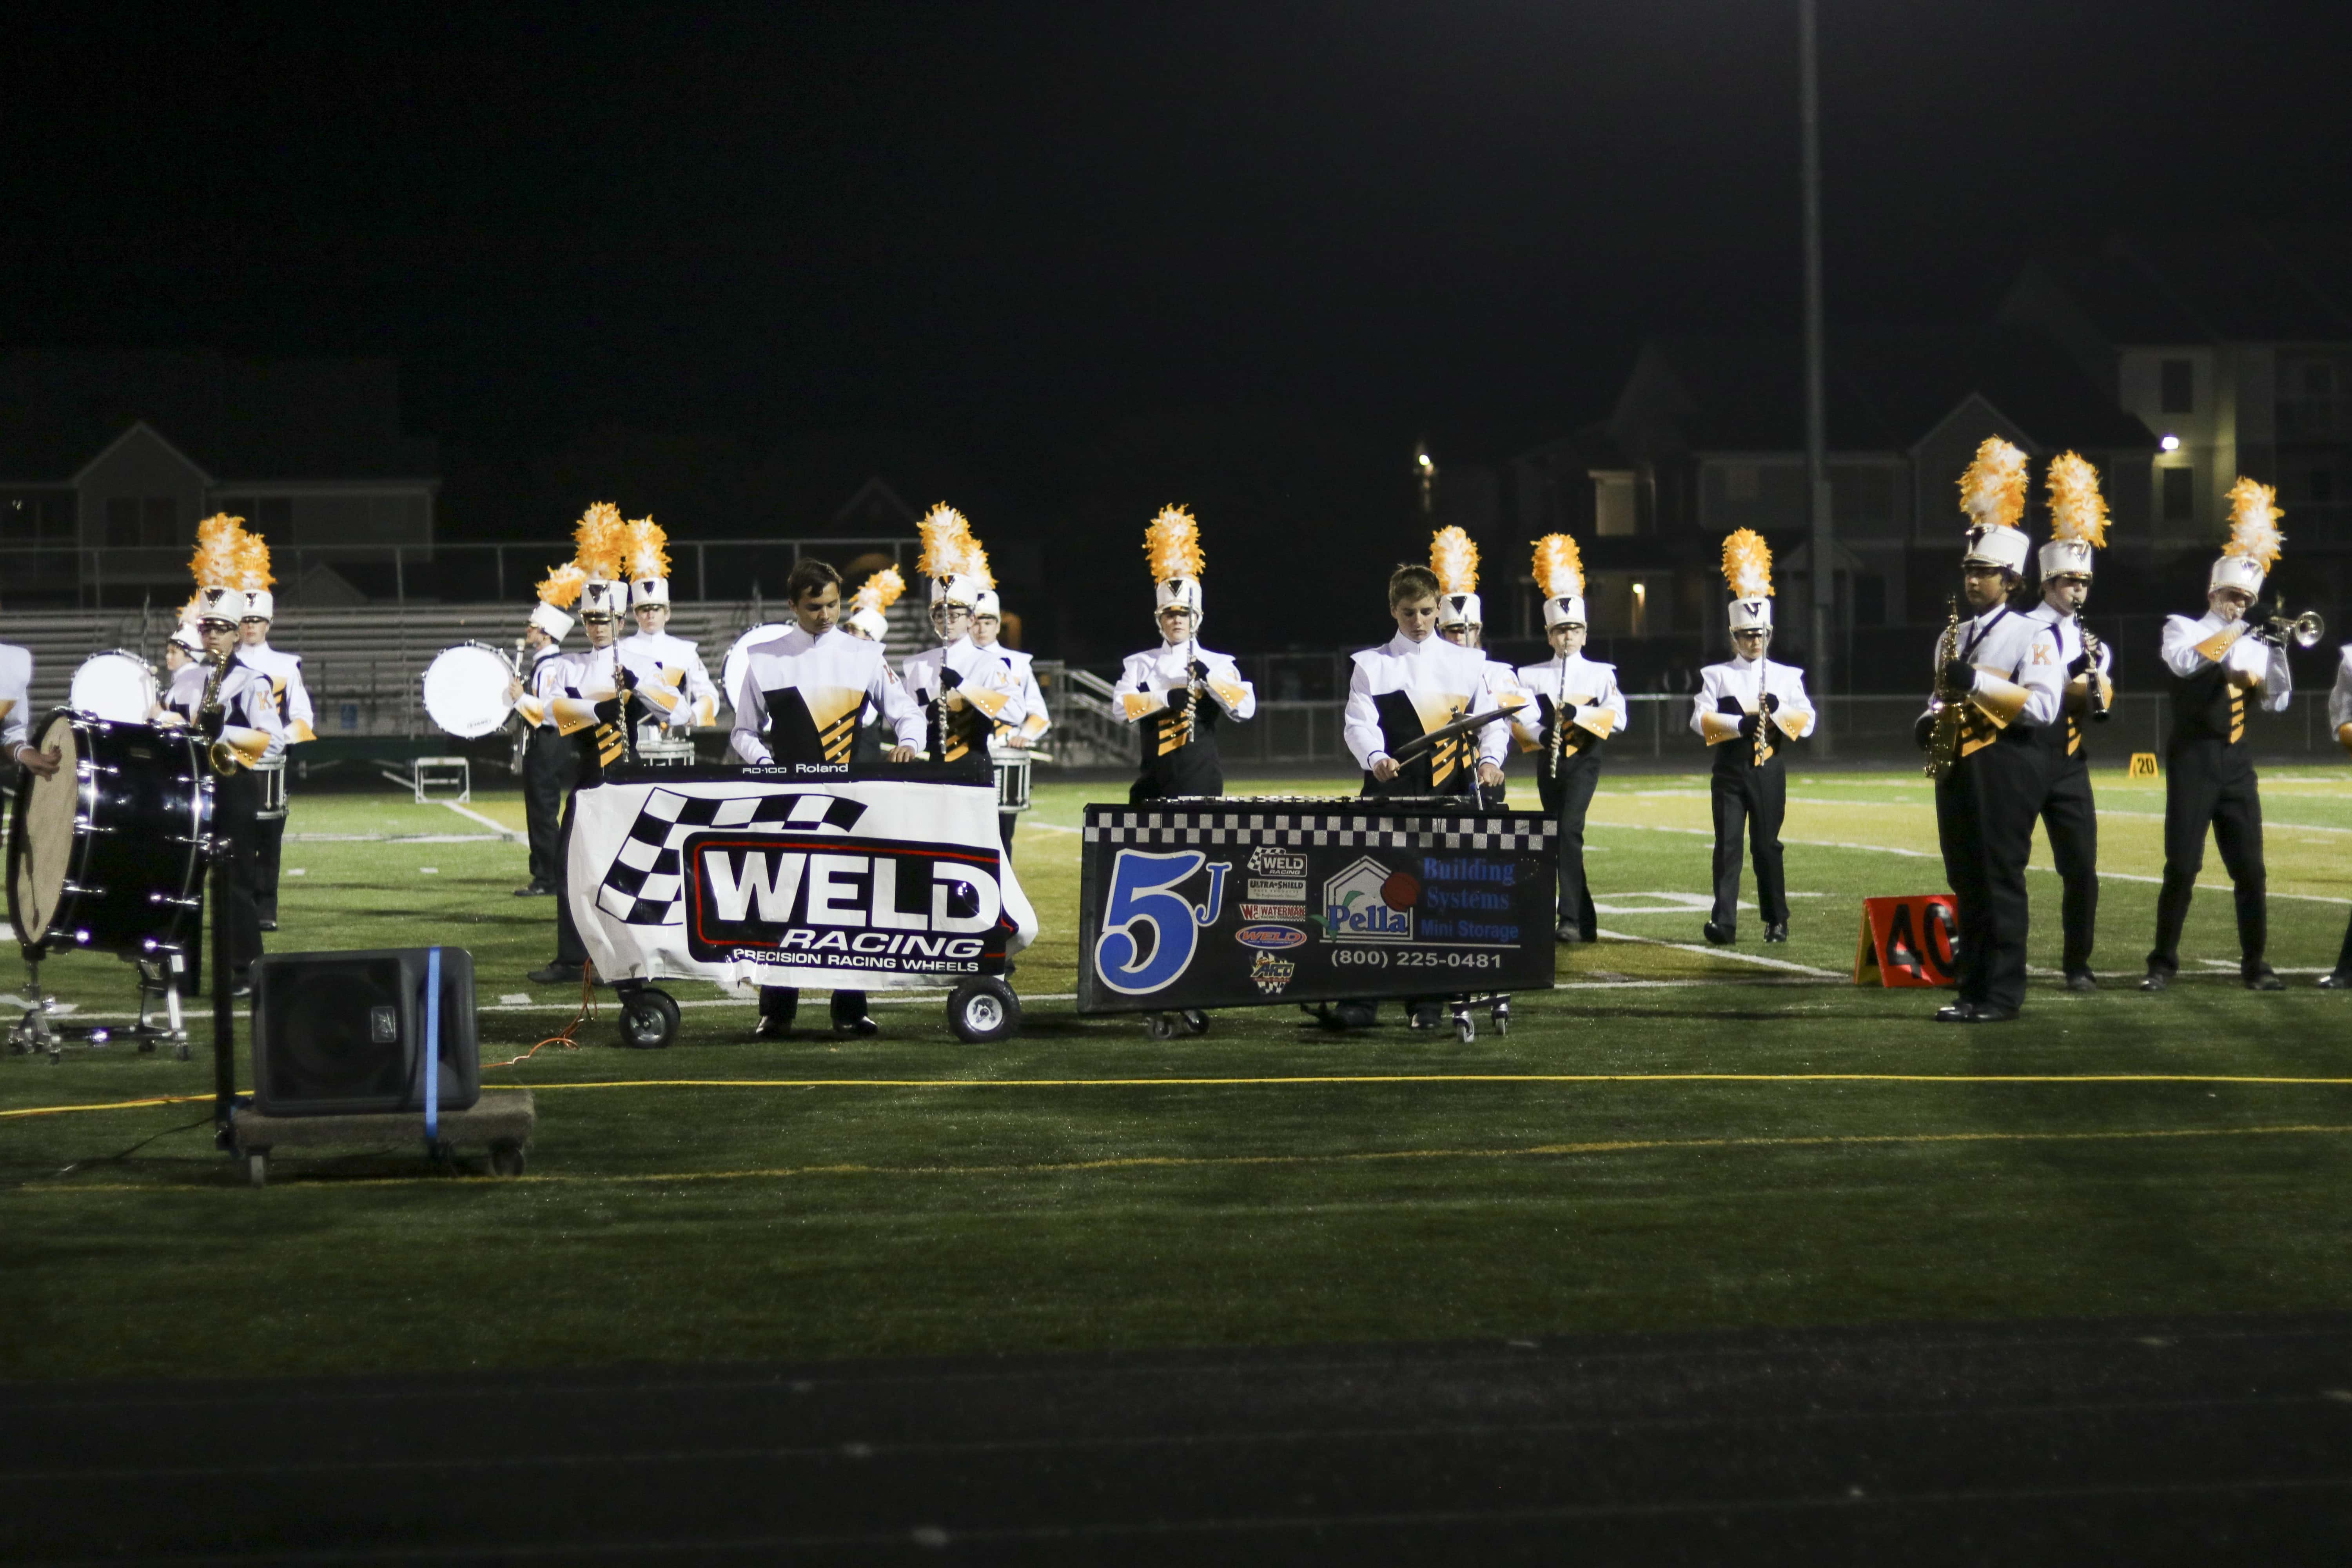 Local Marching Bands All Earn Superior Ratings at State Contest KNIA